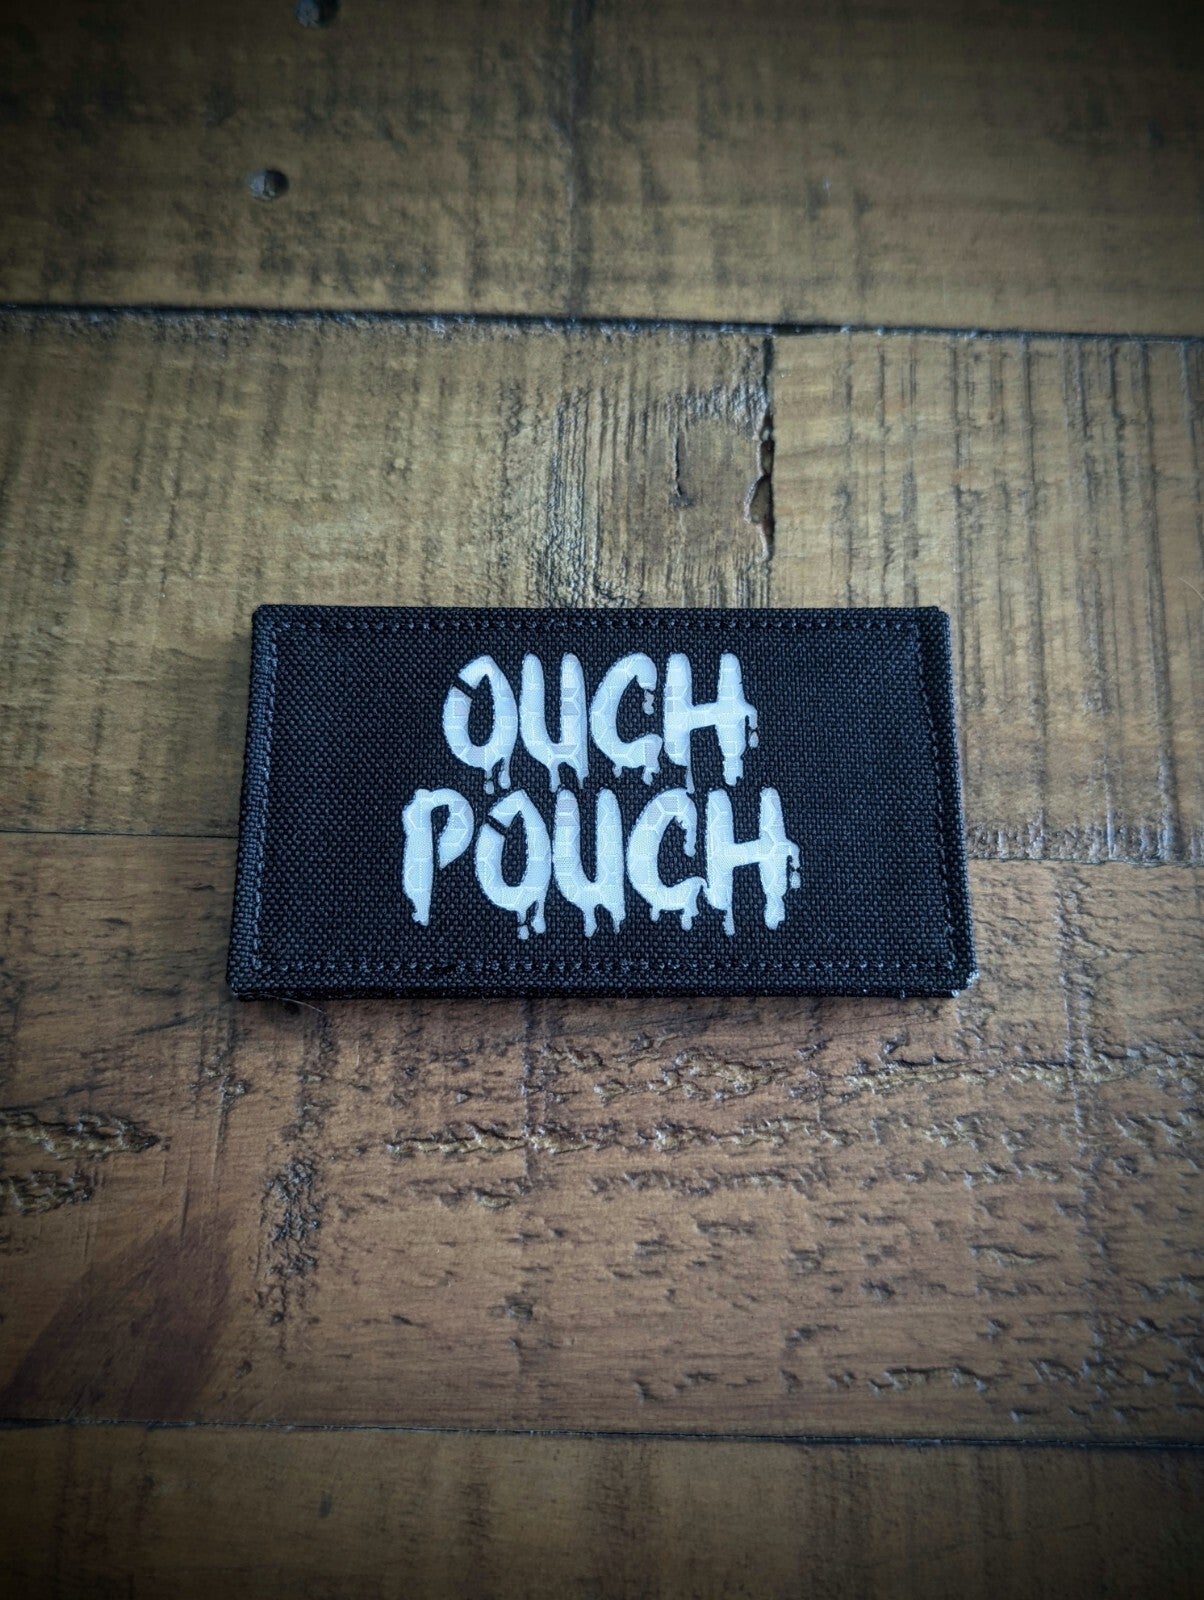  Ouch Pouch - 2x3 Patch - Black